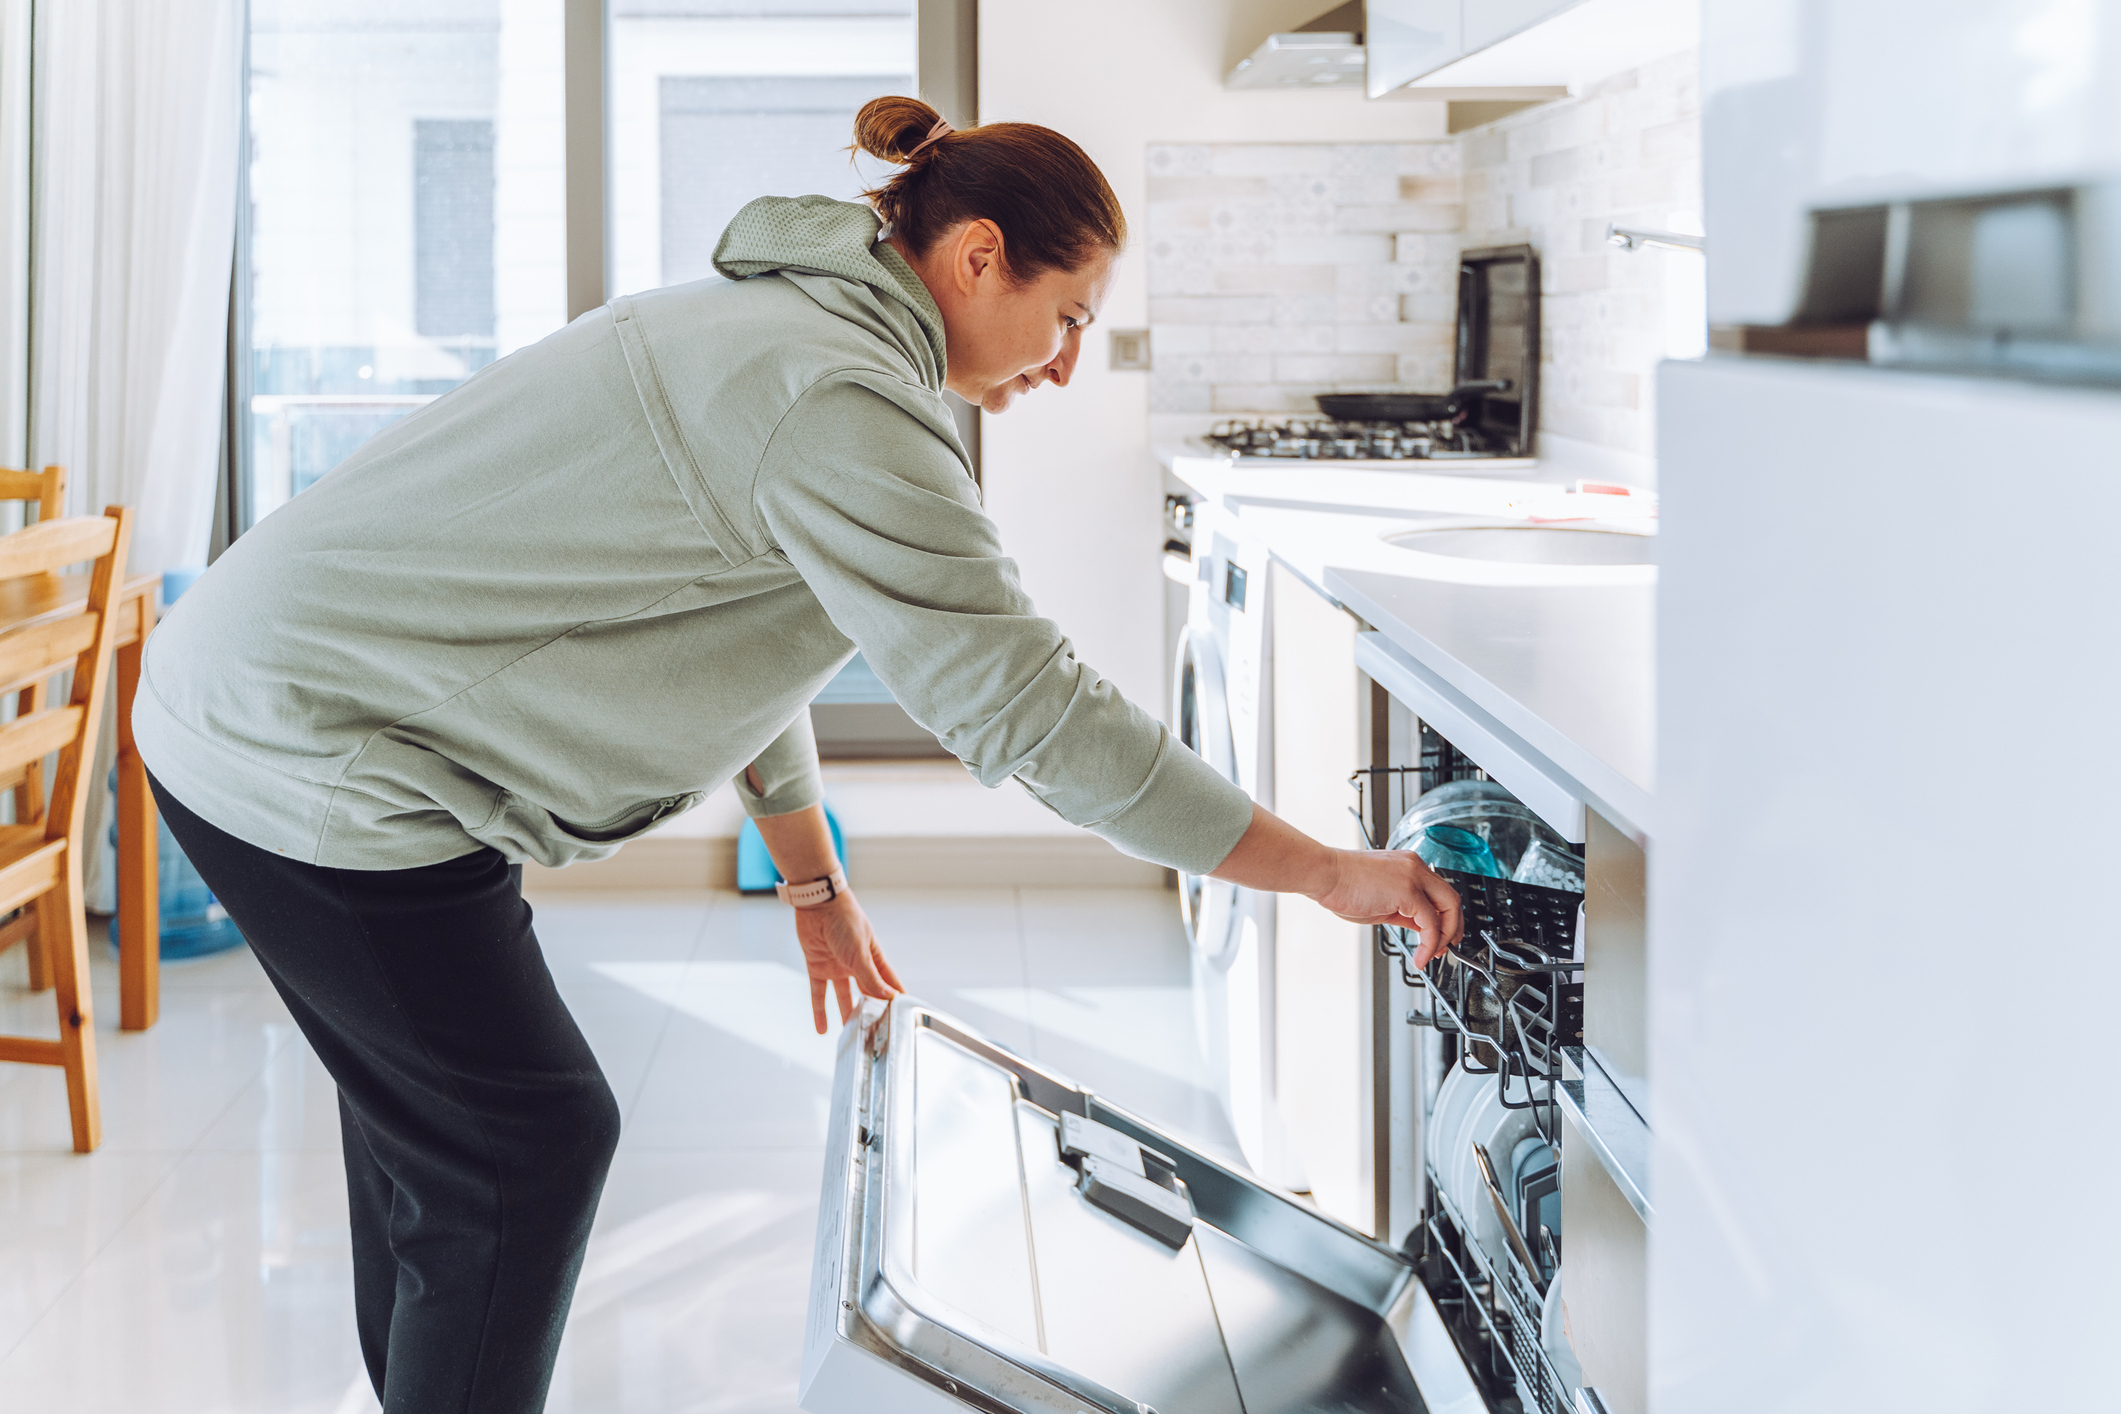 Woman loading a dishwasher in a kitchen setting